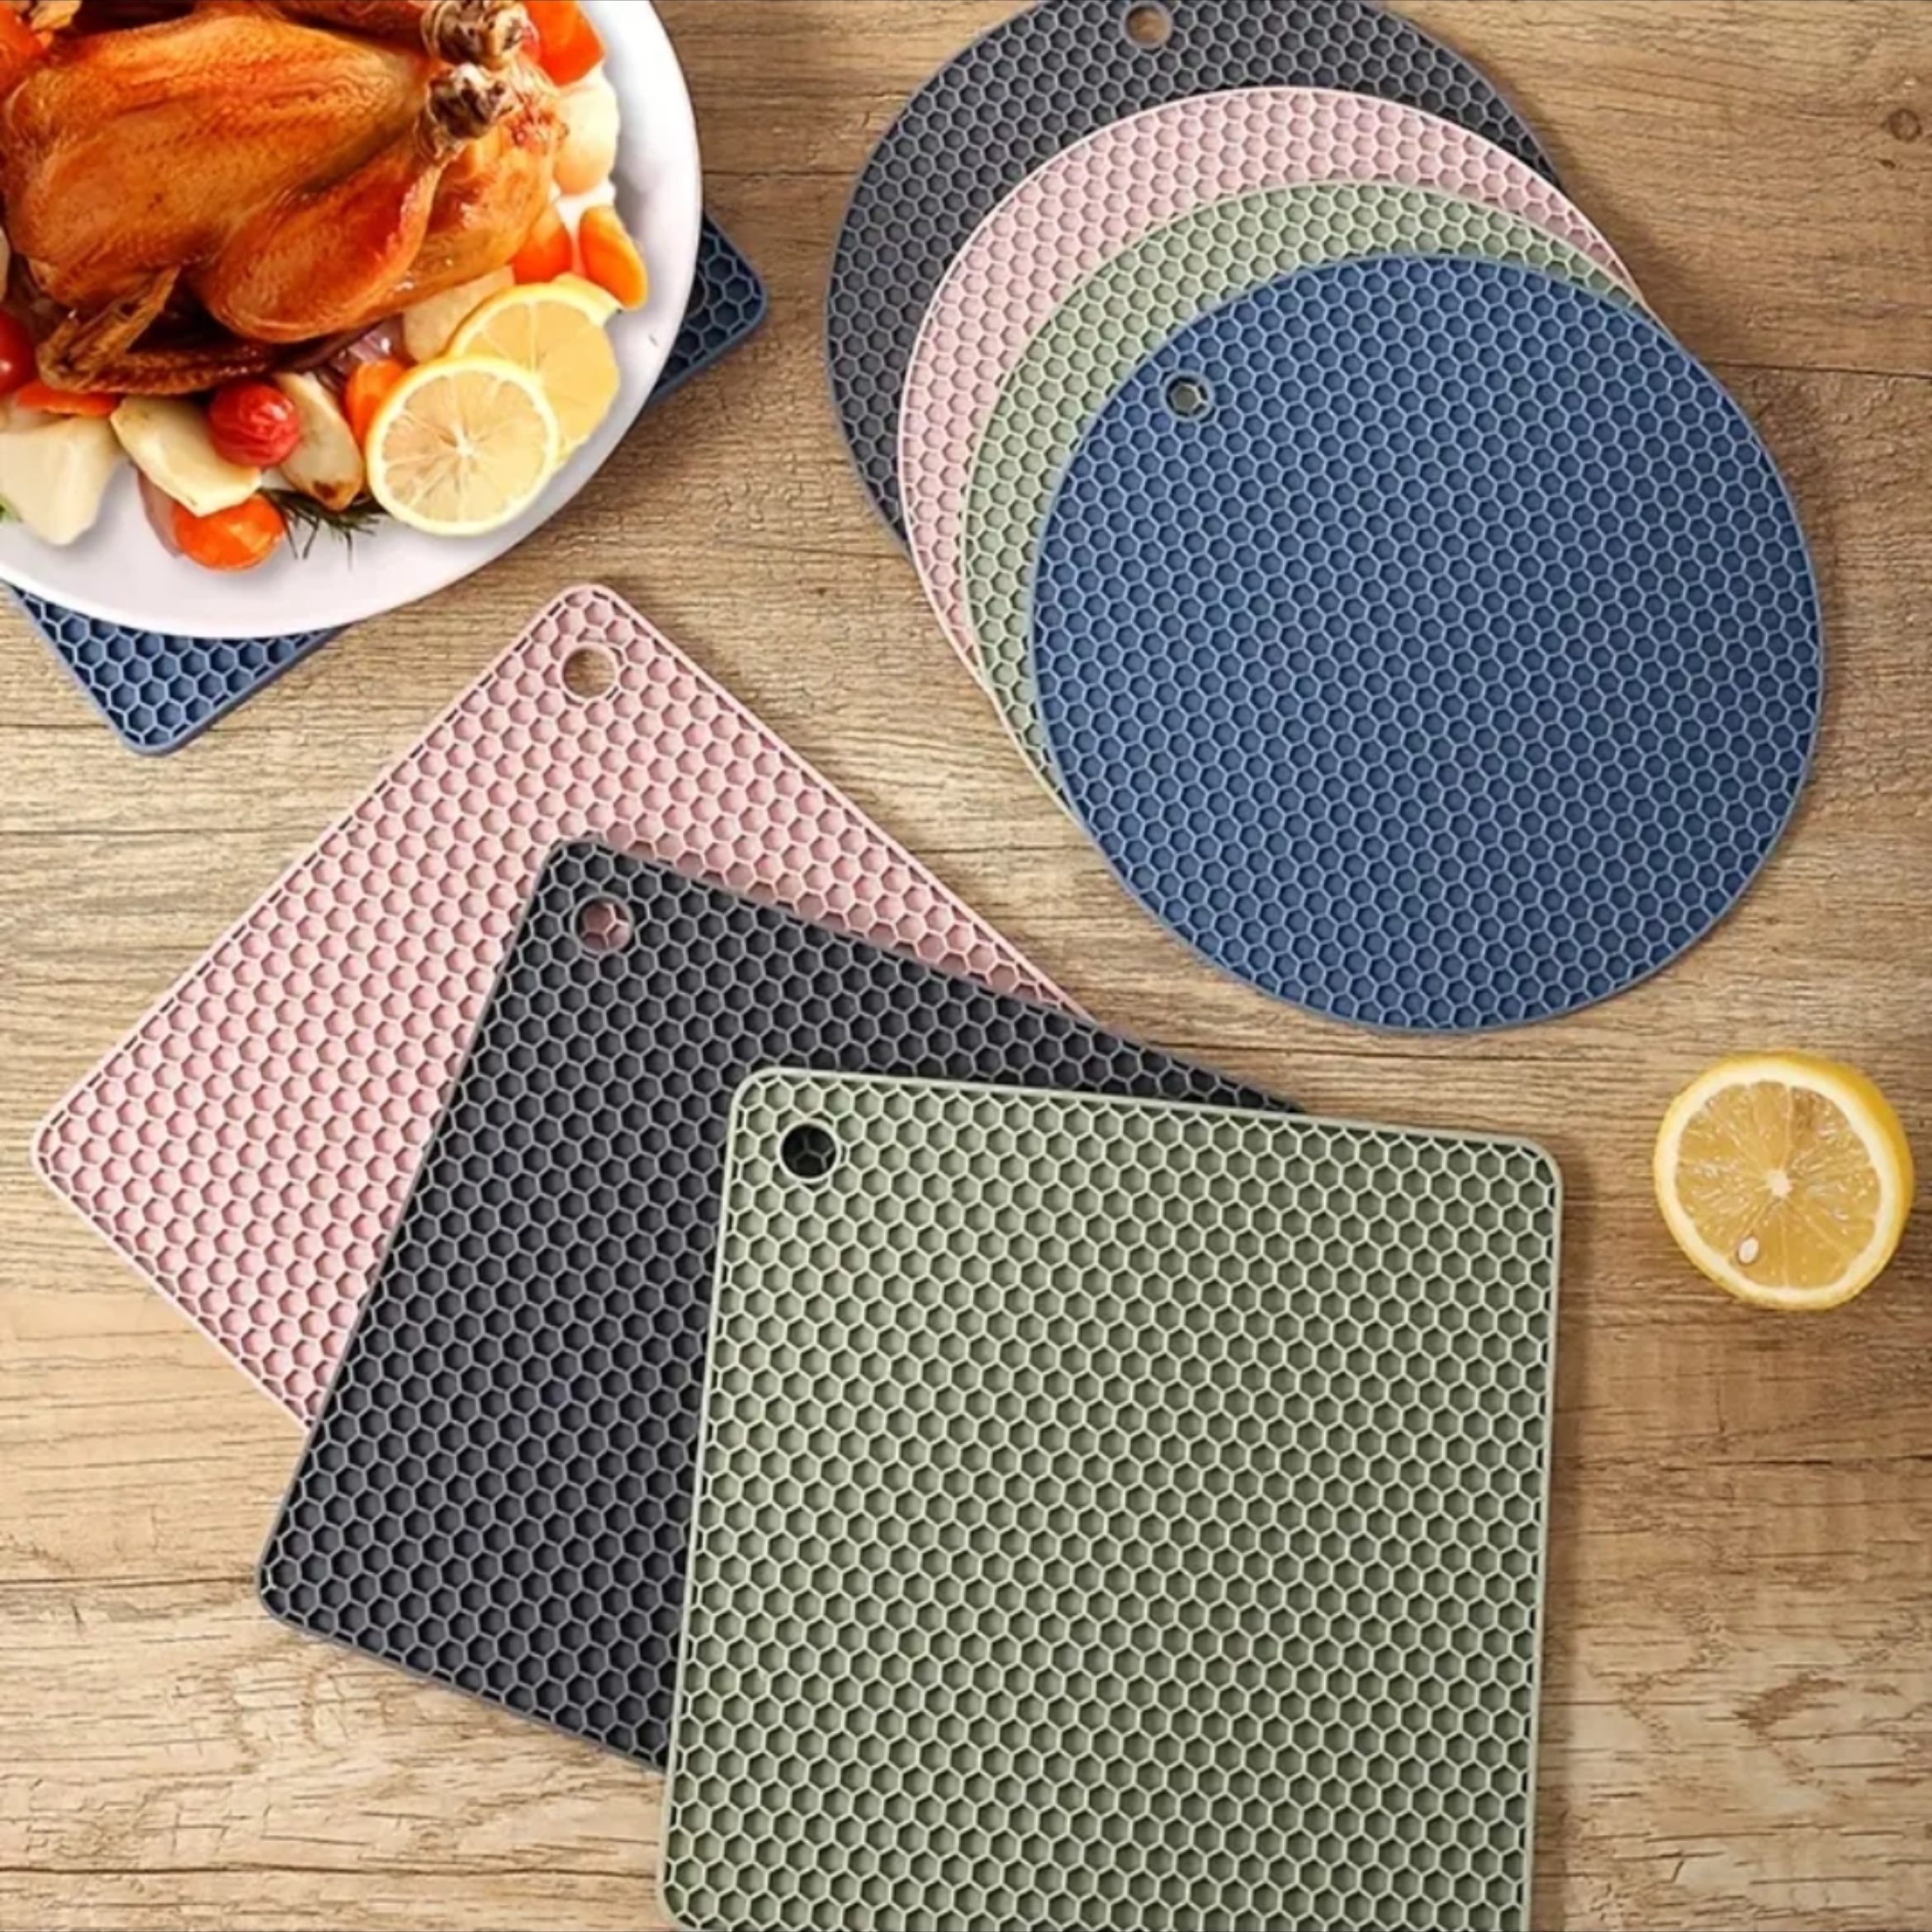 Trivet Table Runner Hot Plates Mat 12 x 40 inch Heat Resistant Table Protector Waterproof Decorative Farmhouse Kitchen Trivets Counter Heat Proof